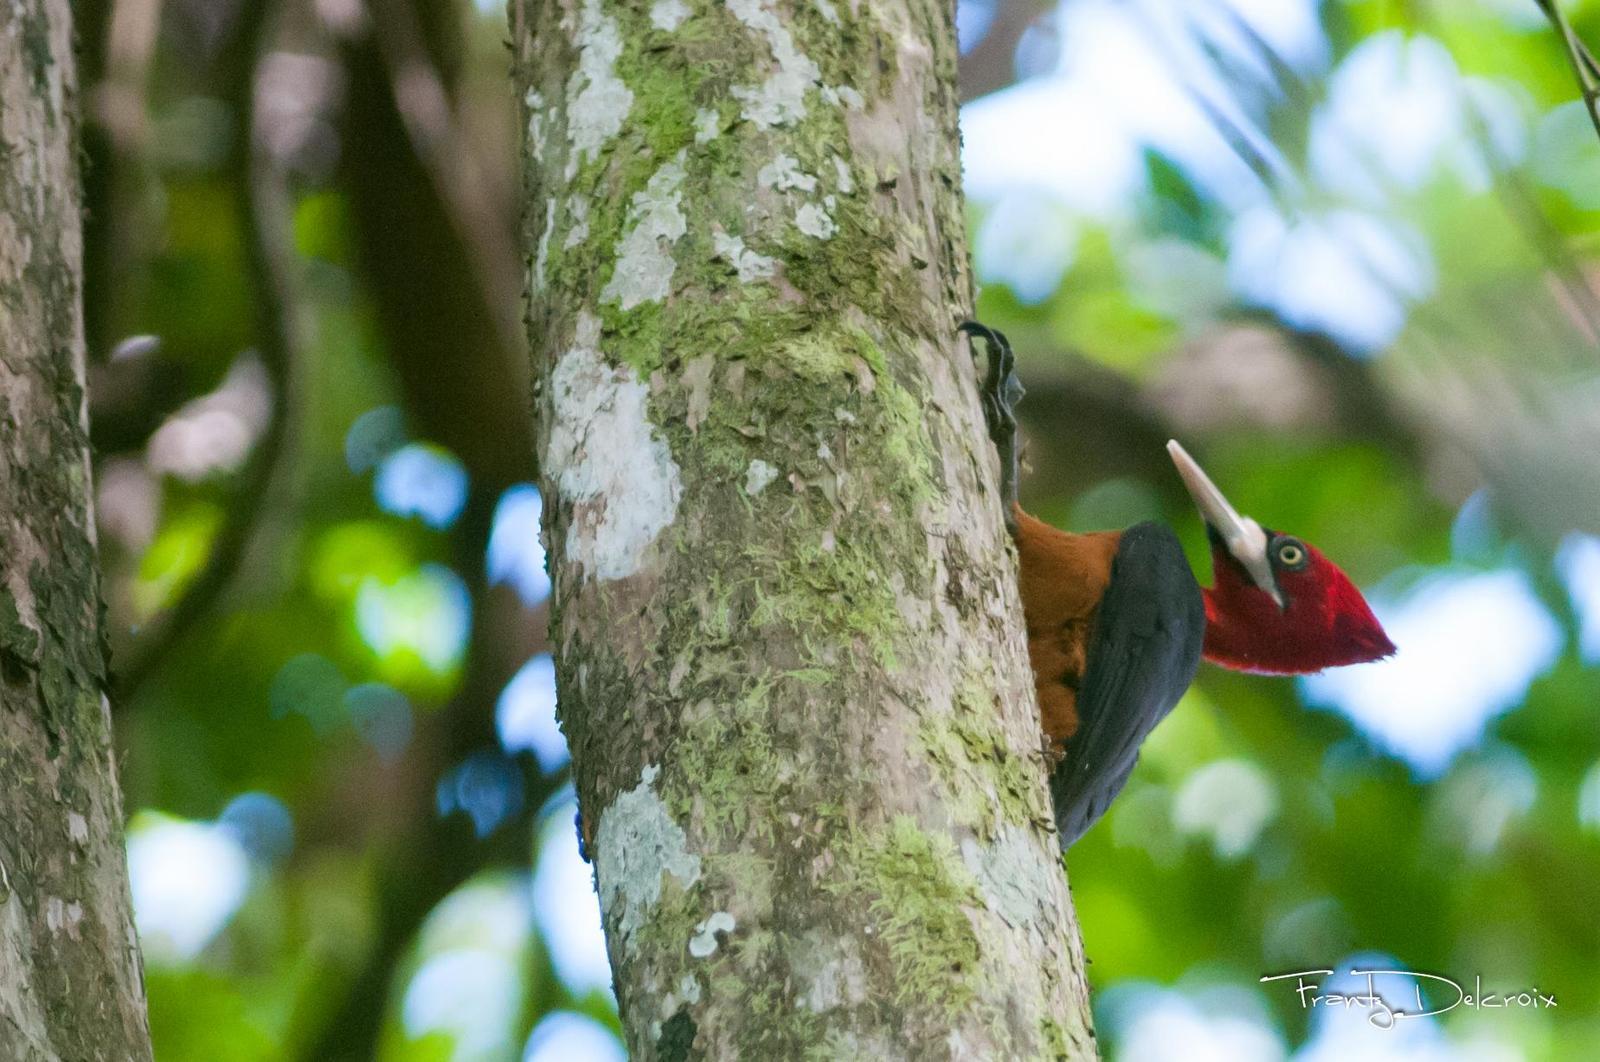 Red-necked Woodpecker Photo by Frantz Delcroix